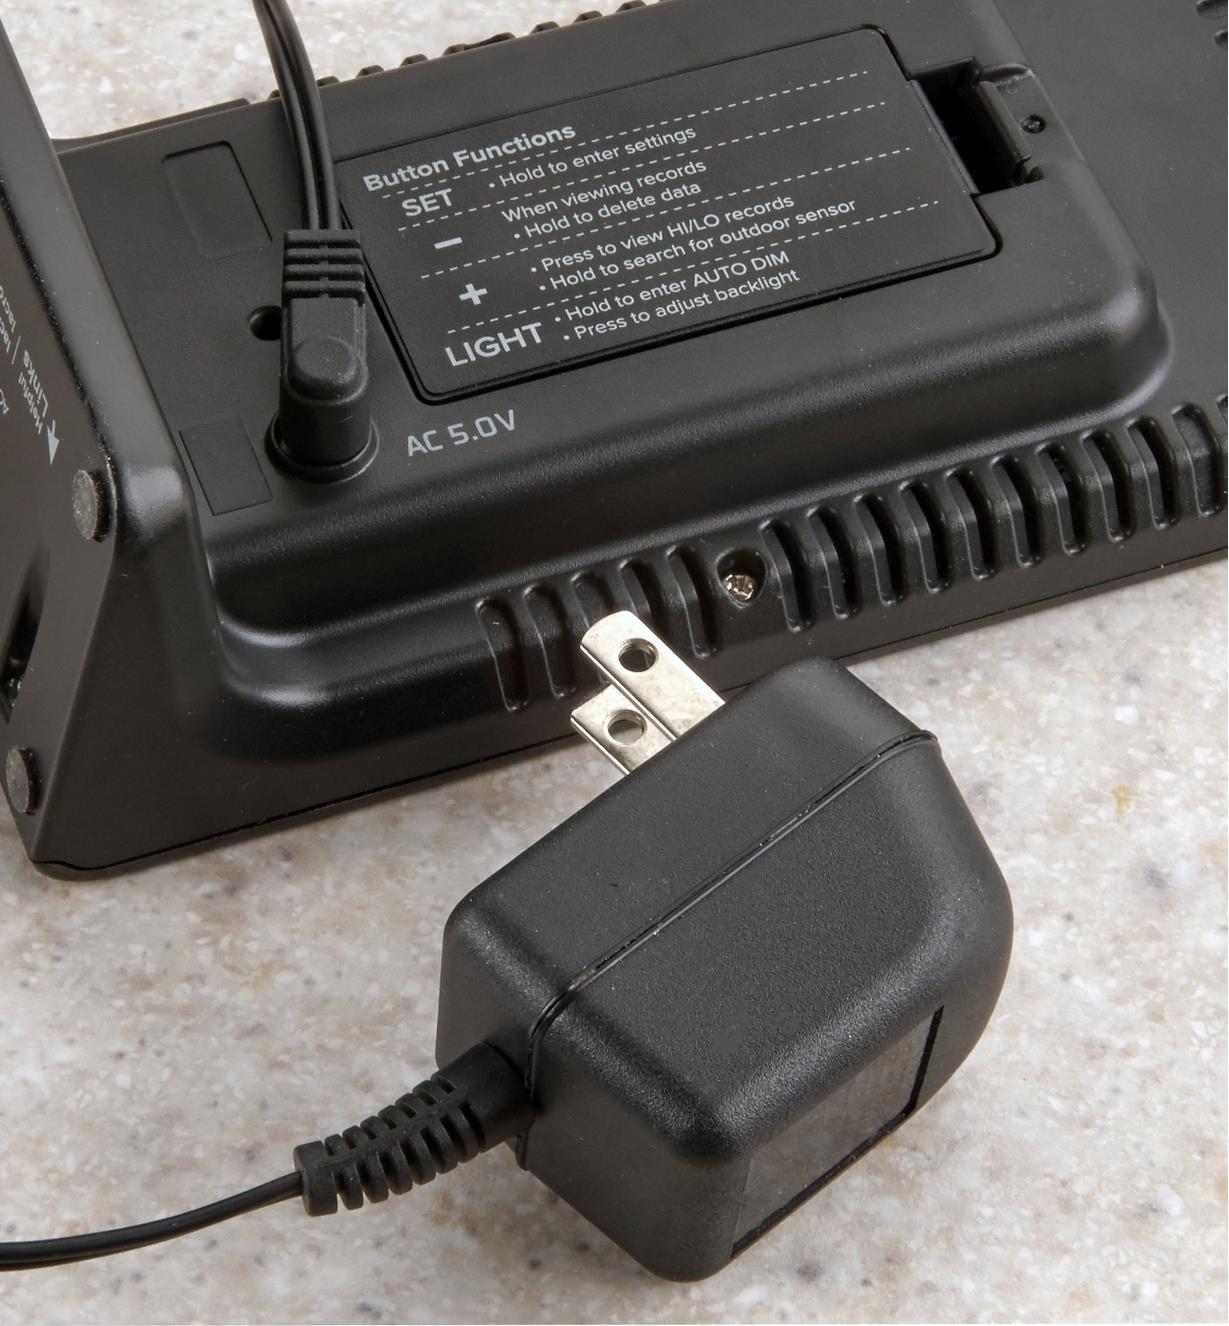 Included AC adapter